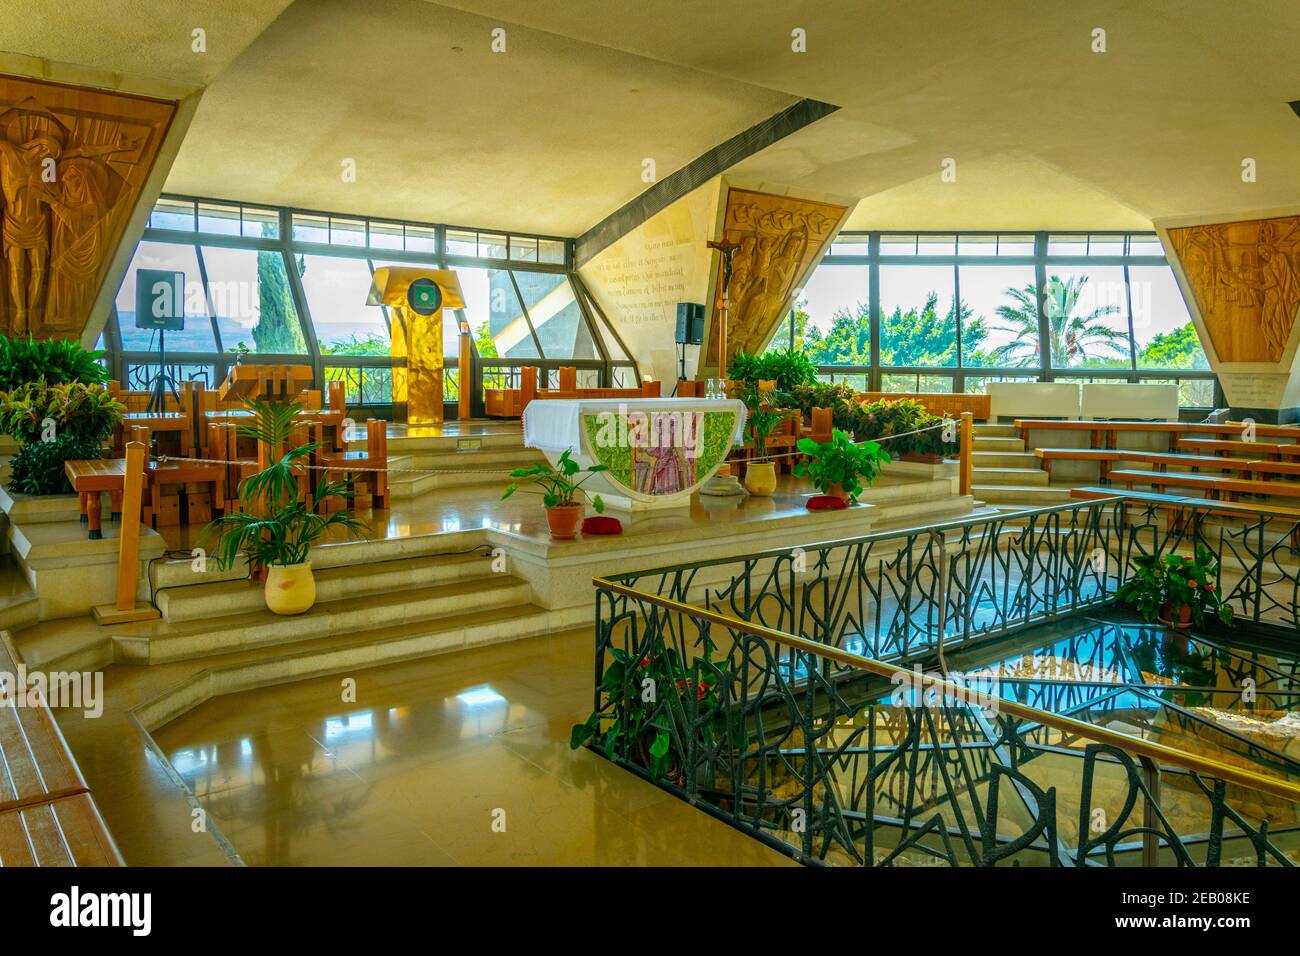 CAPERNAUM, ISRAEL, SEPTEMBER 15, 2018: Interior of a modern church inside of the Capernaum complex in Israel Stock Photo